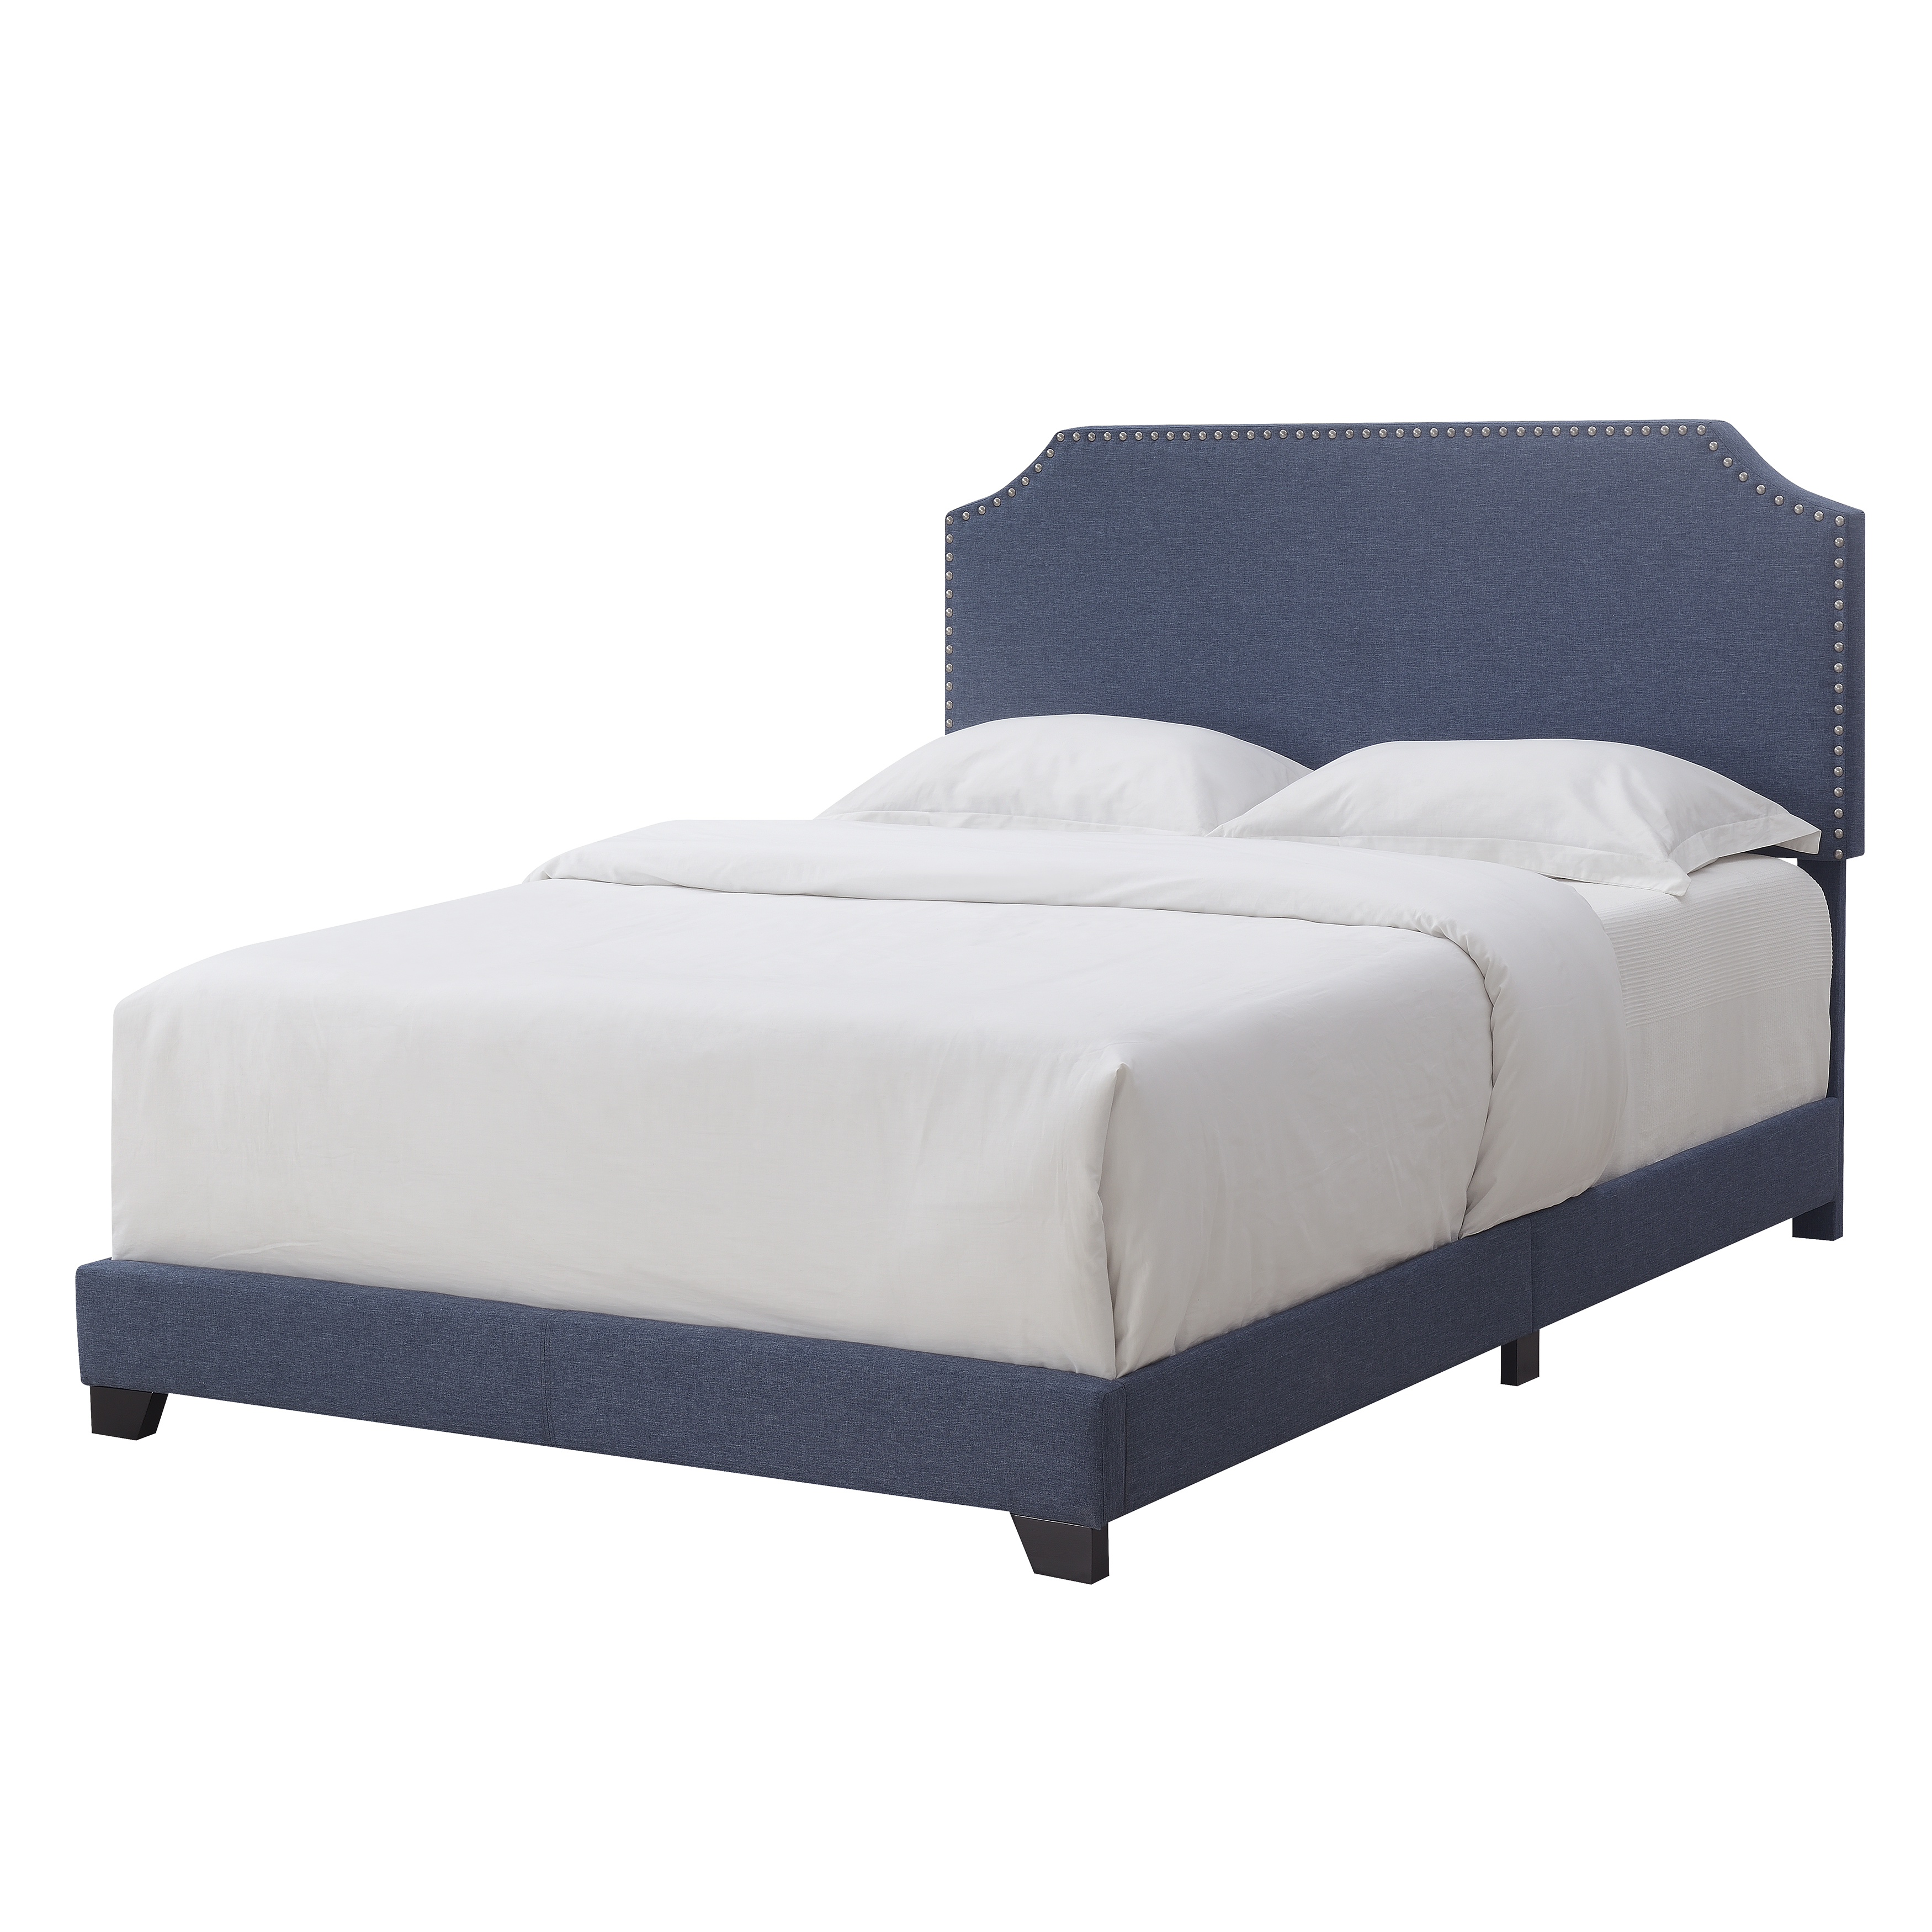 HomeFare Clipped Corner Upholstered Queen Bed DS-A124-290-1